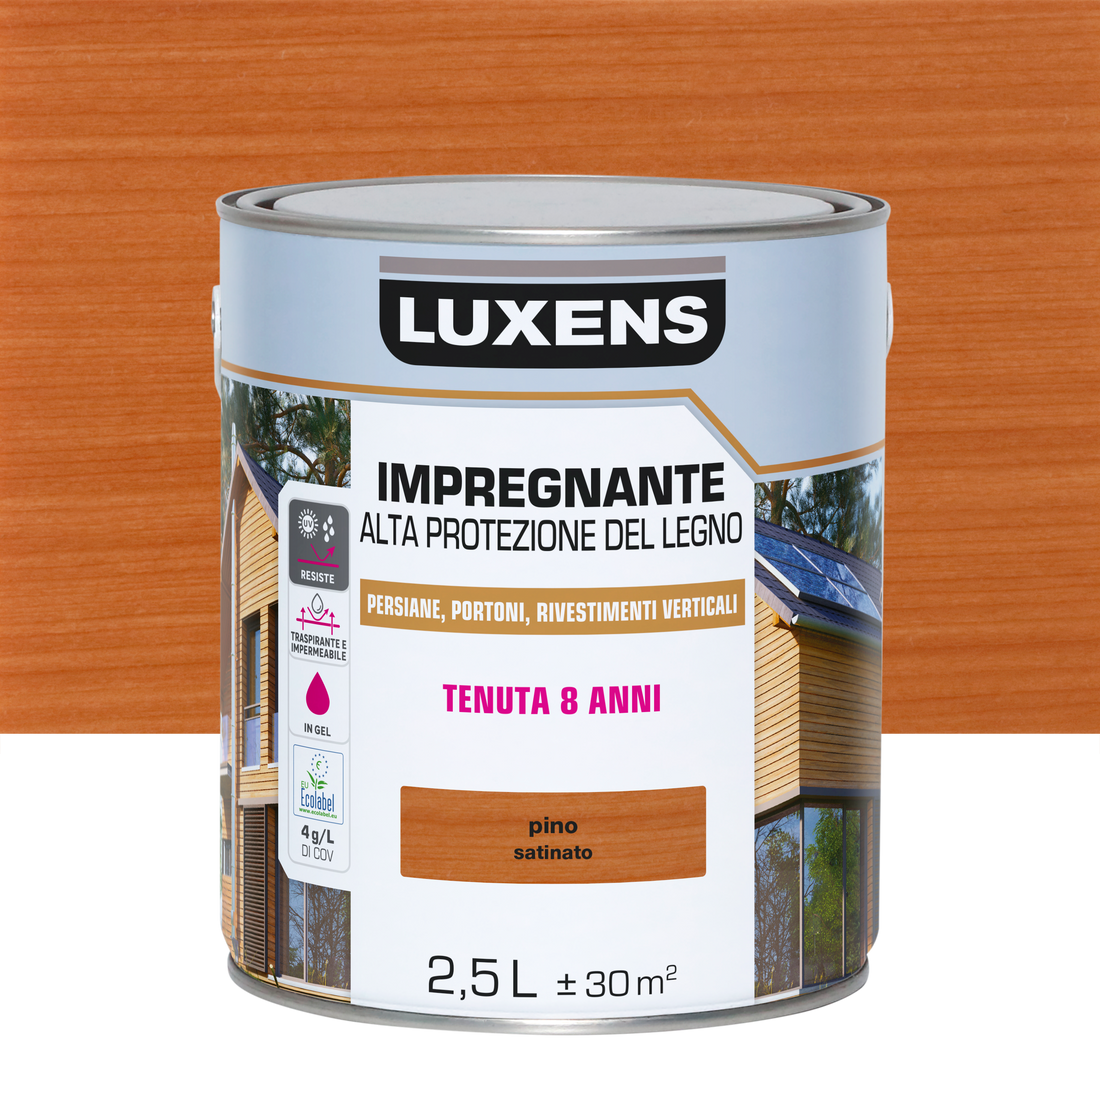 LUXENS HIGH PROTECTION WATER-BASED PINE WOOD PRESERVATIVE 2.5 L